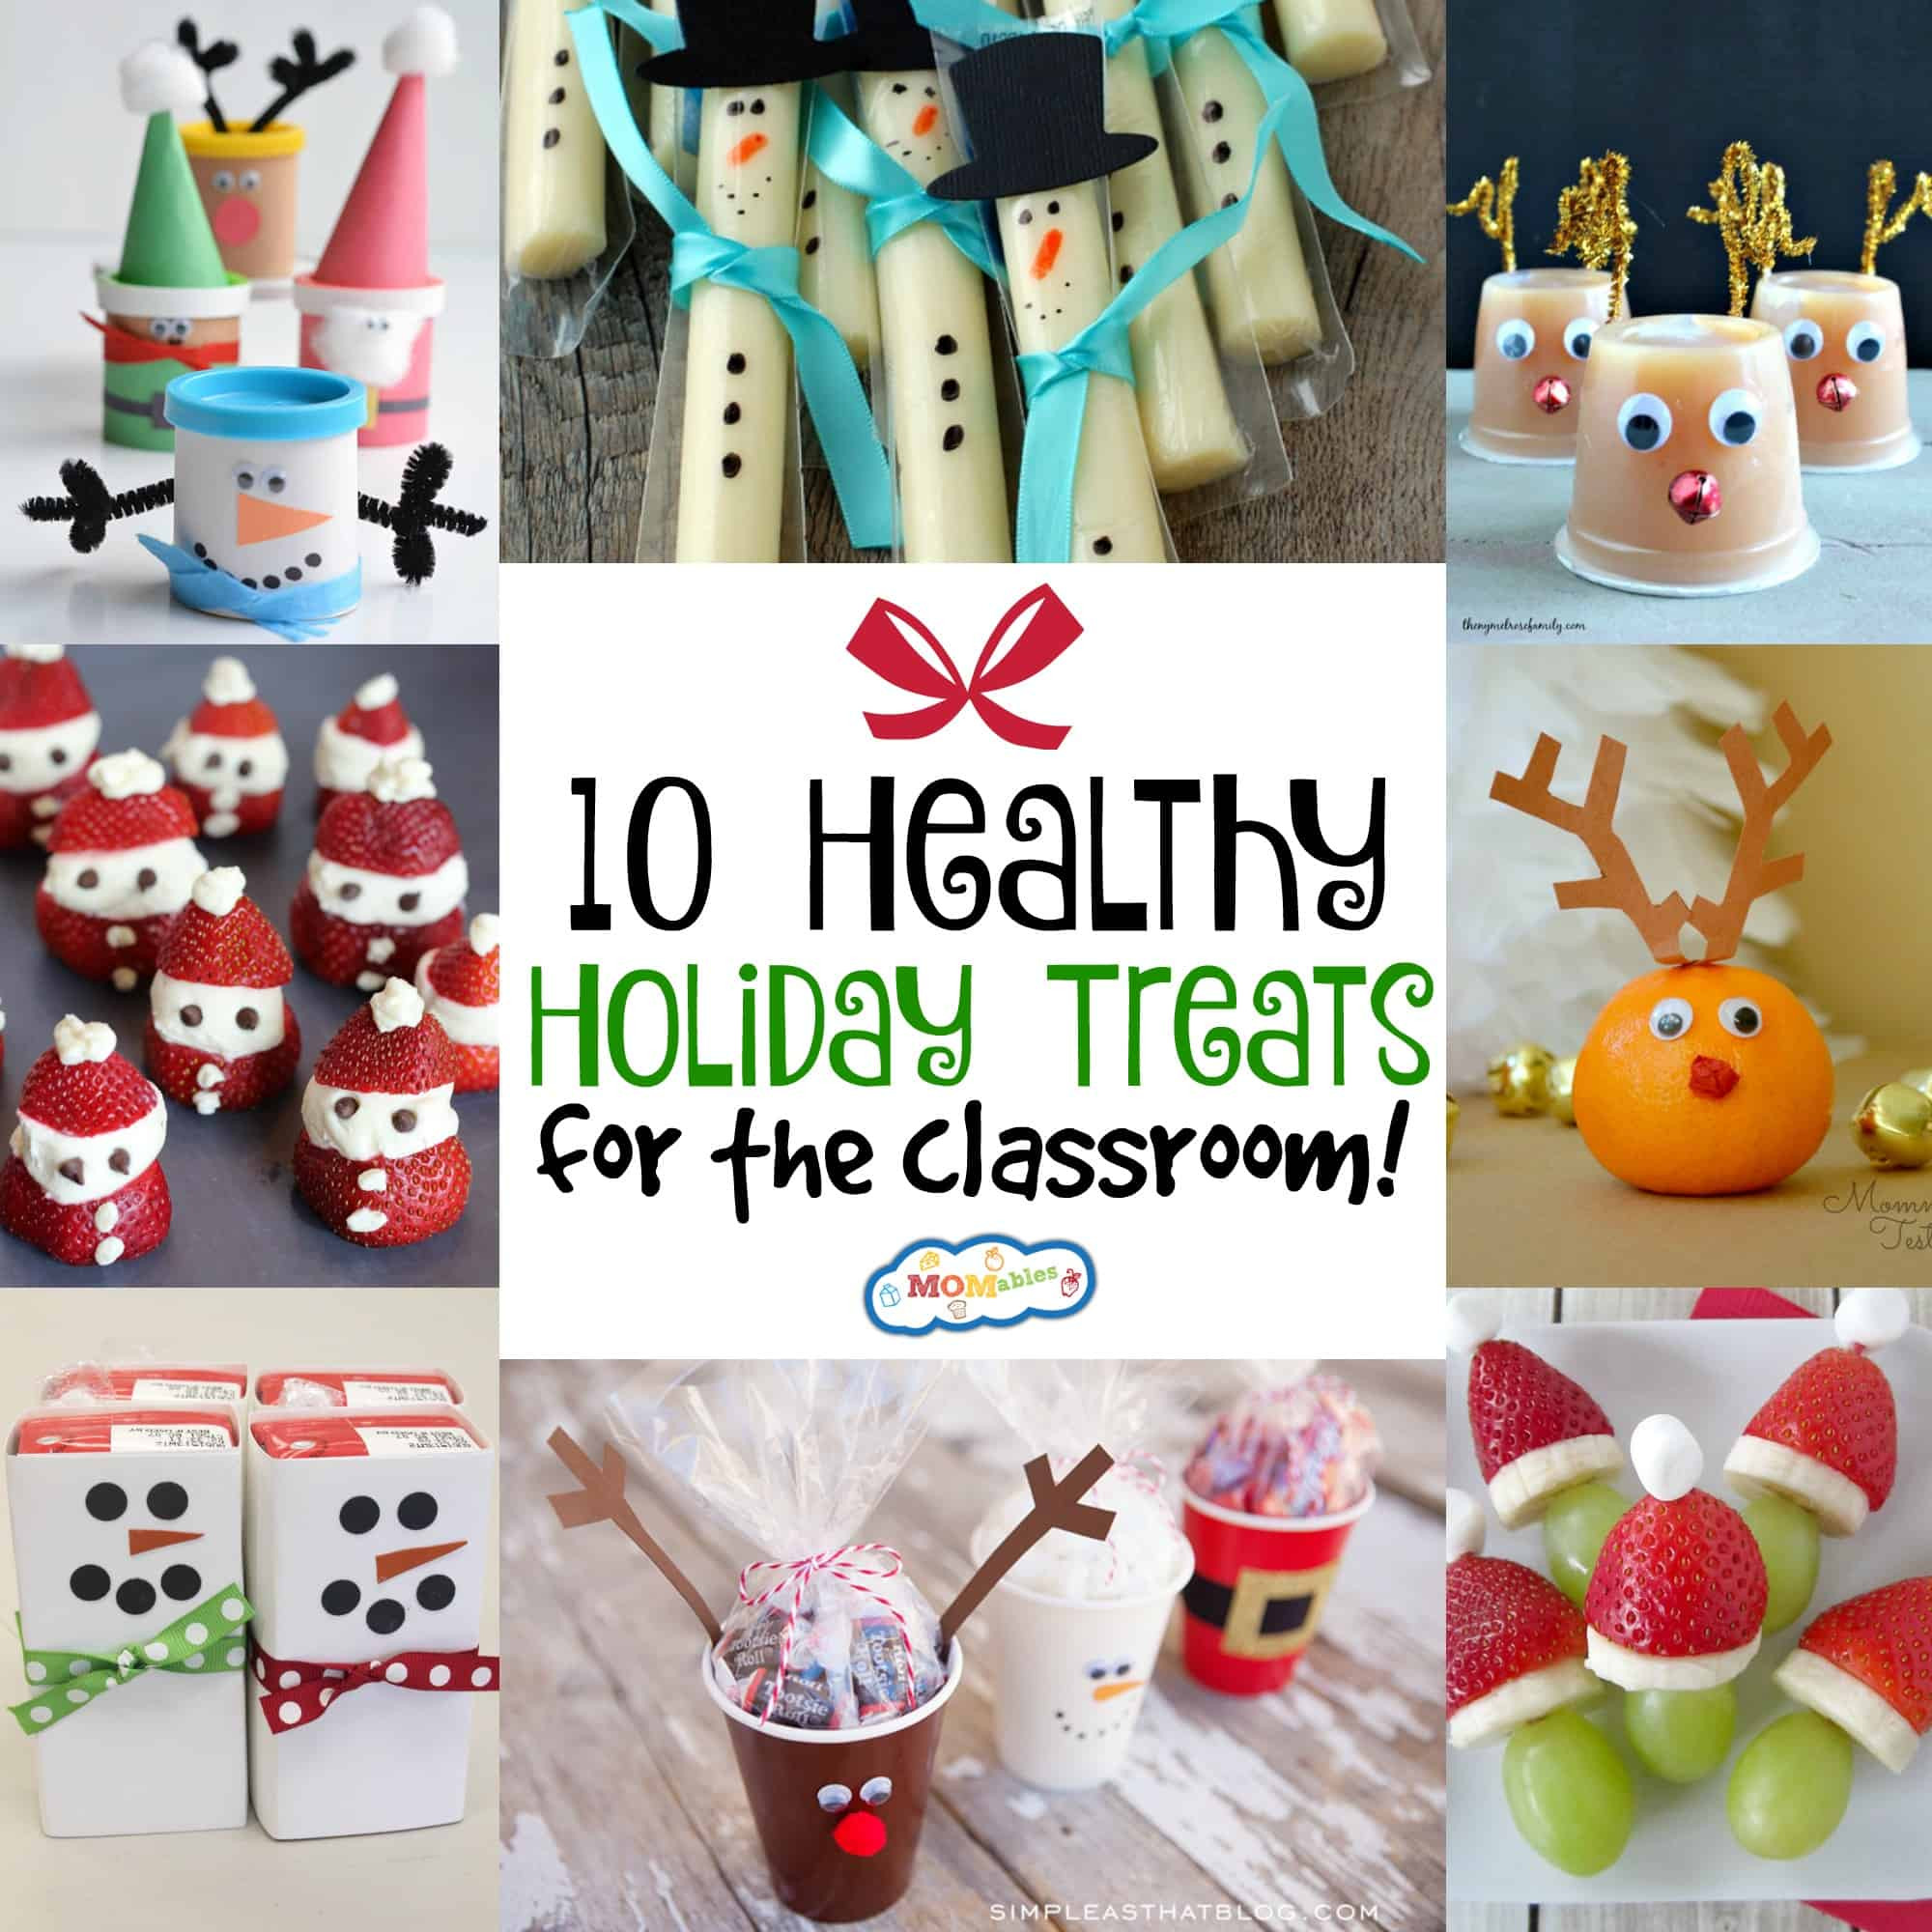 Kids Christmas Party Snack Ideas
 10 Healthy Holiday Treats for the Classroom MOMables